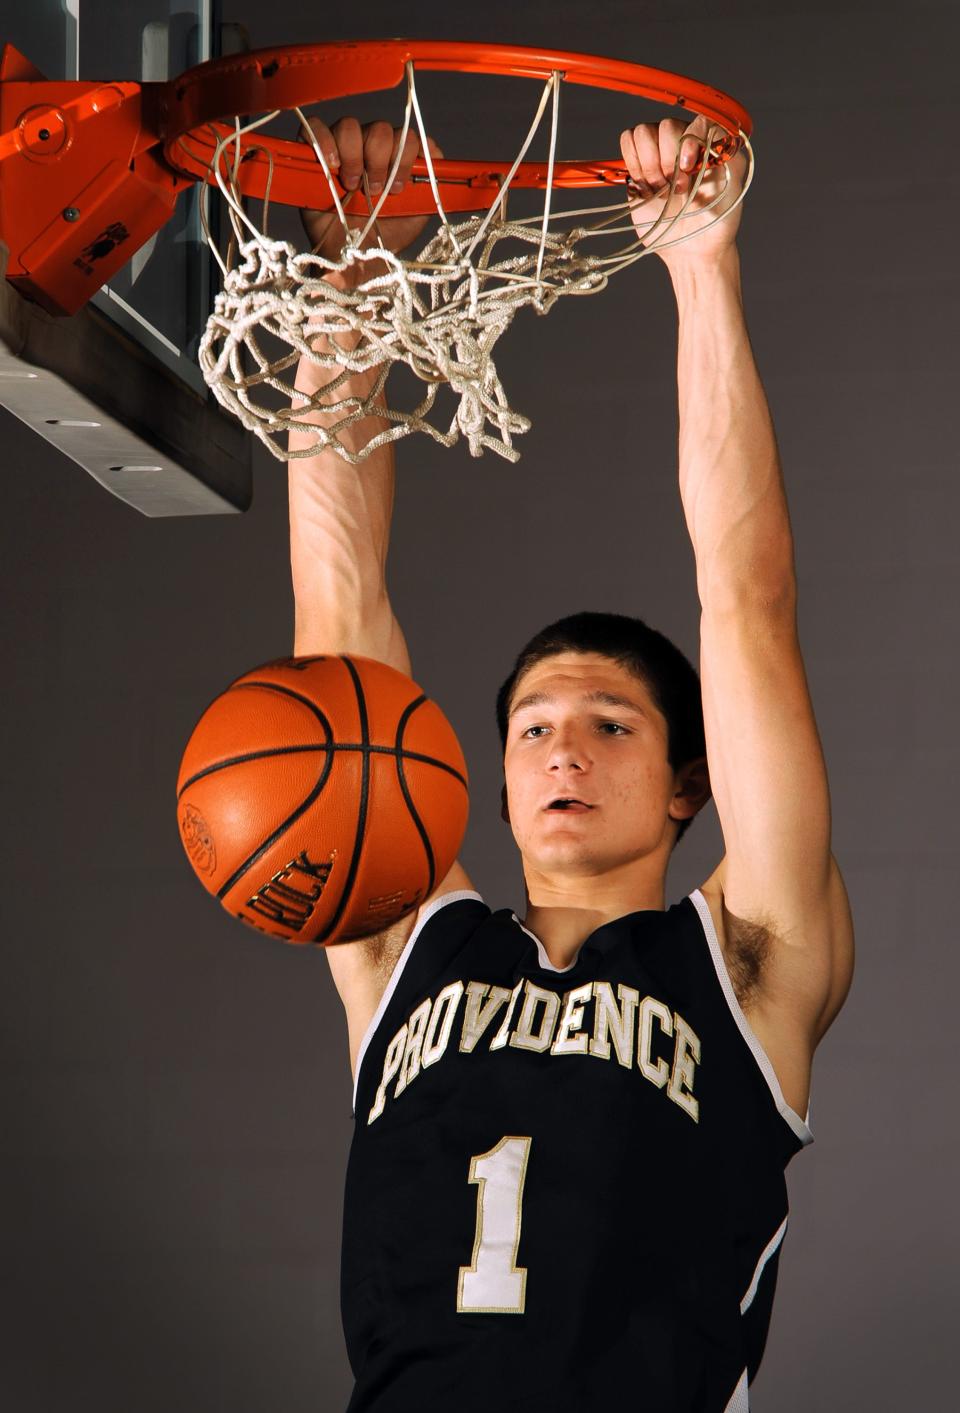 Providence boys basketball player Grayson Allen, pictured on April 3, 2013, won the Florida Times-Union All-First Coast player of the year award for high school boys basketball in 2012-13.